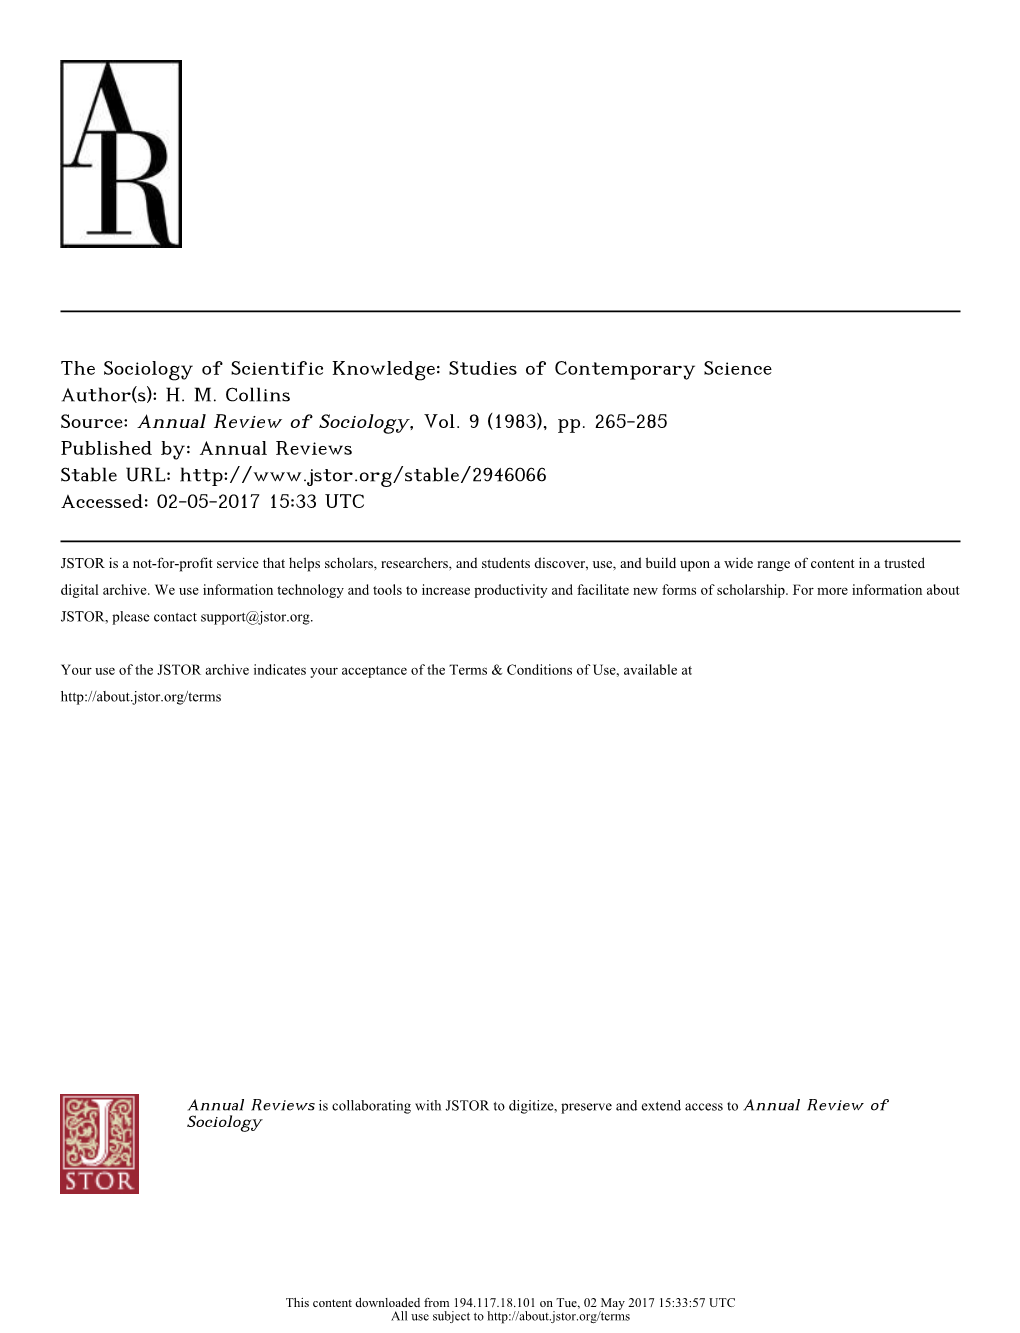 The Sociology of Scientific Knowledge: Studies of Contemporary Science Author(S): H